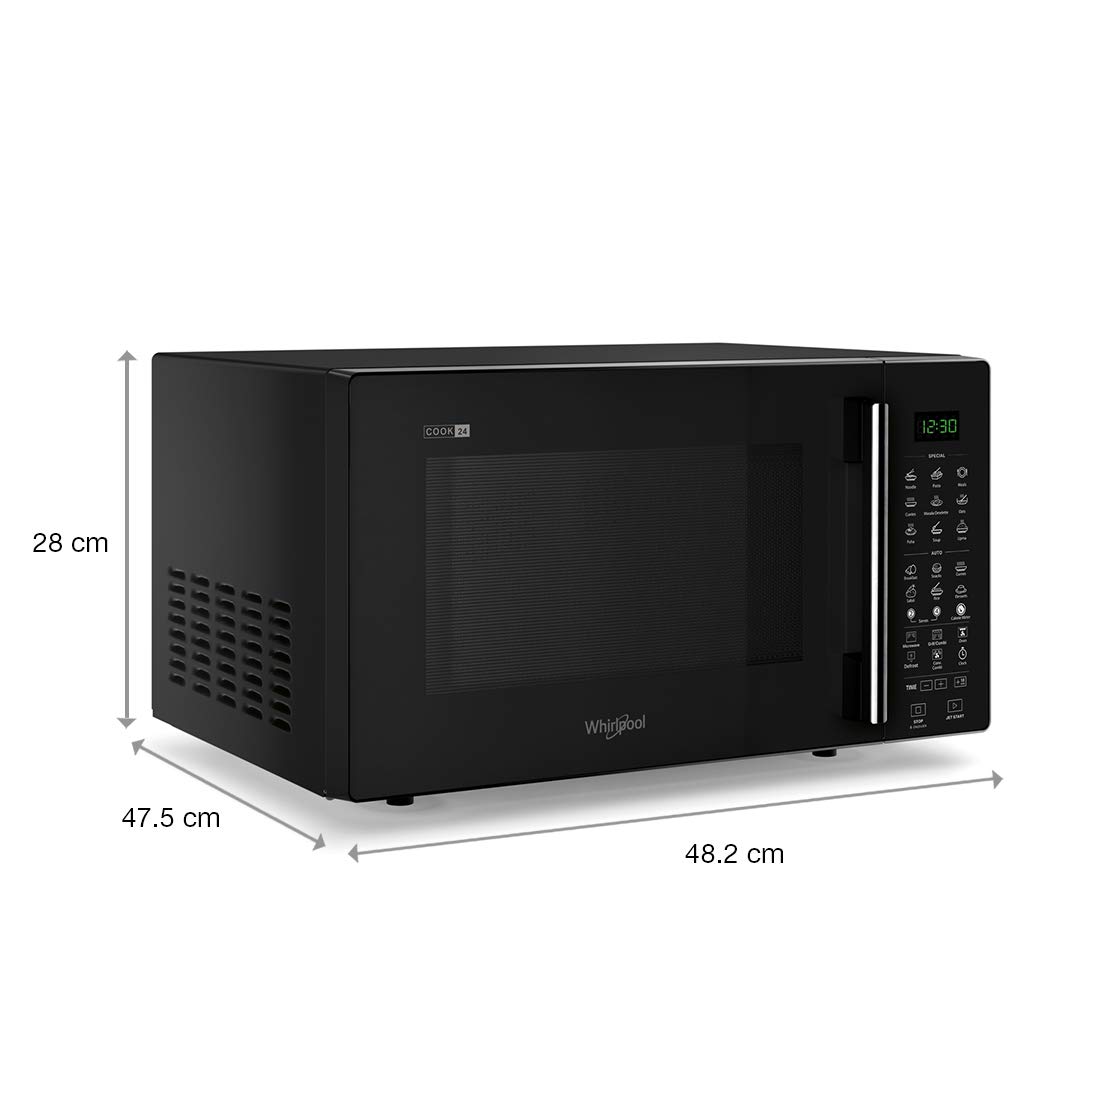 Whirlpool 24 L Convection Microwave Oven (Magicook Pro 26CE, Black)-11472